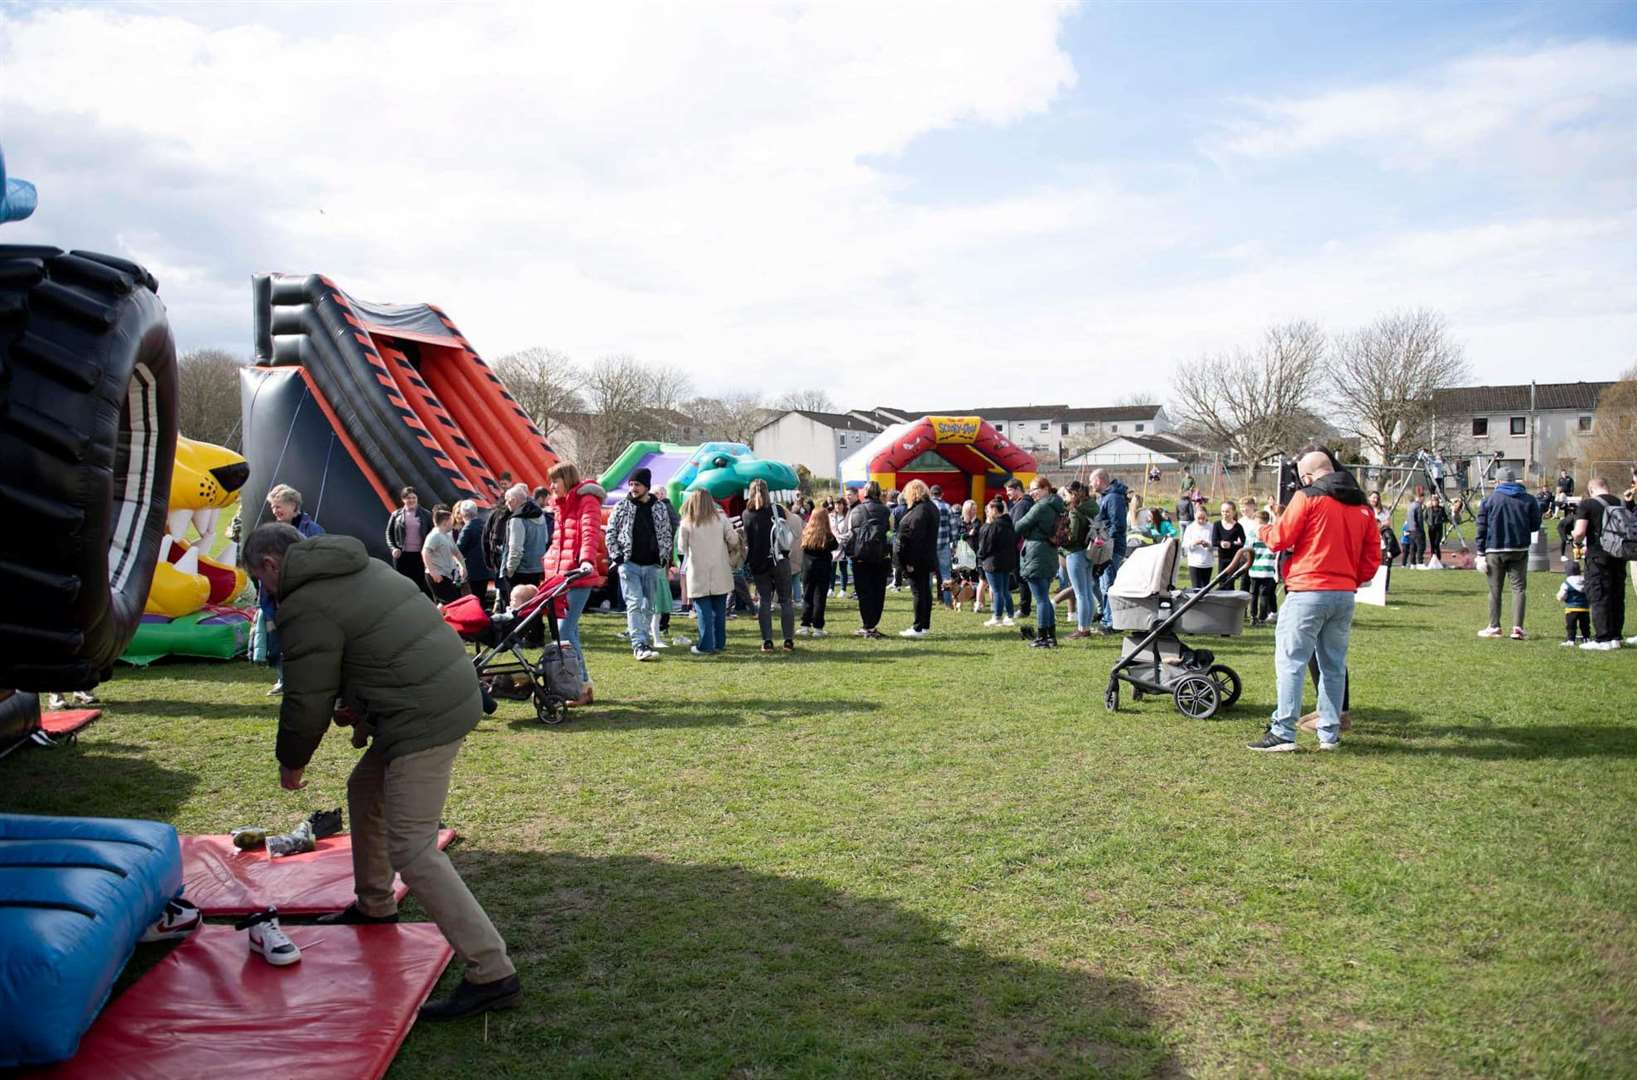 There was a large turnout for the popular fun day, with families enjoying some of the inflatable fun. Picture: Craig Johnson at ‘I Do Photography’.